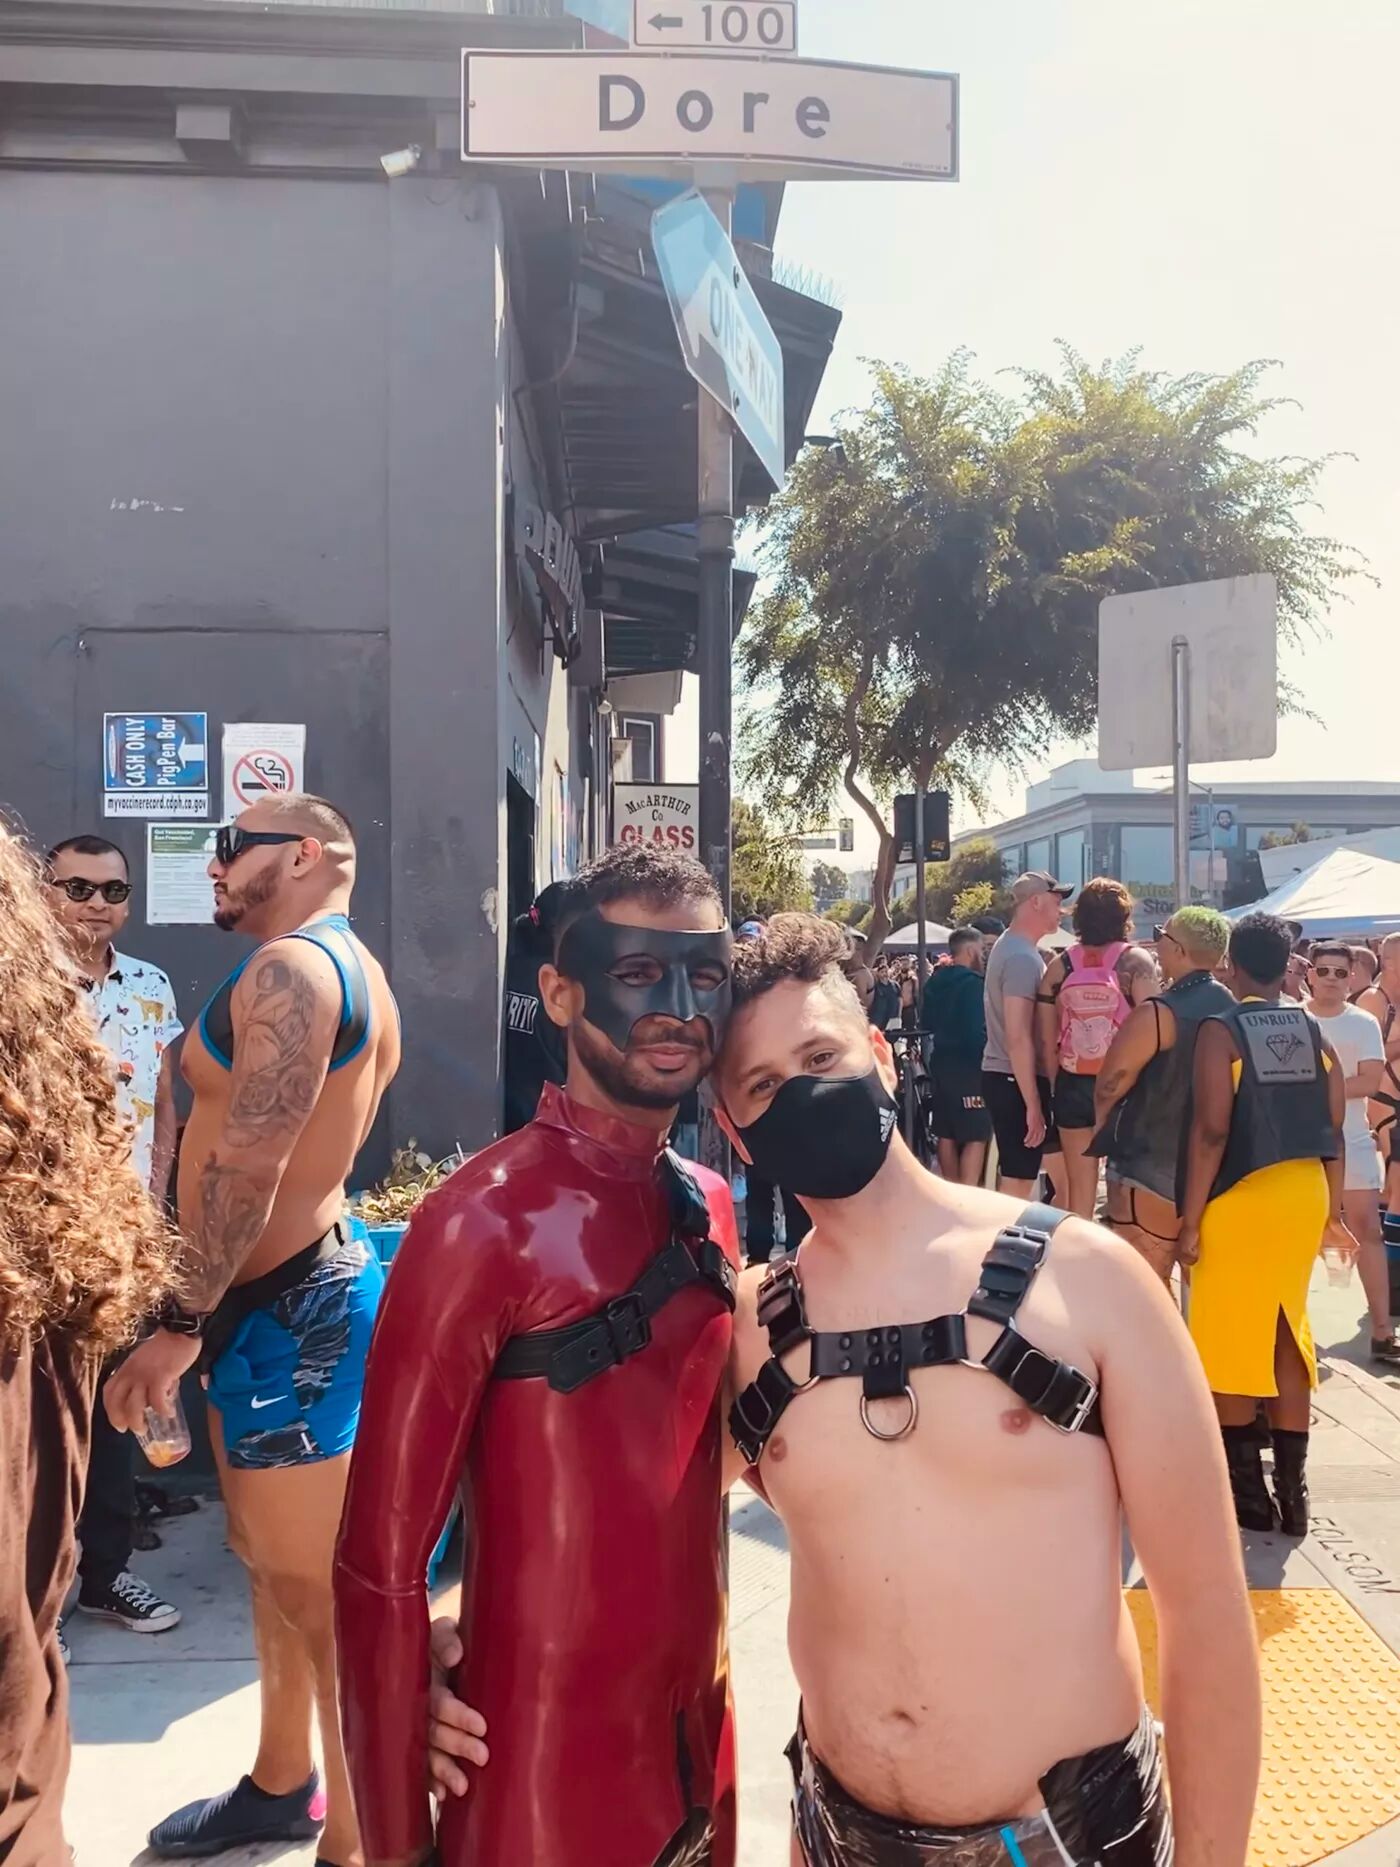 Two men stand in a busy street. One wearing a leather harness and face mast, the other dawning a full body red latex suit and batman mask